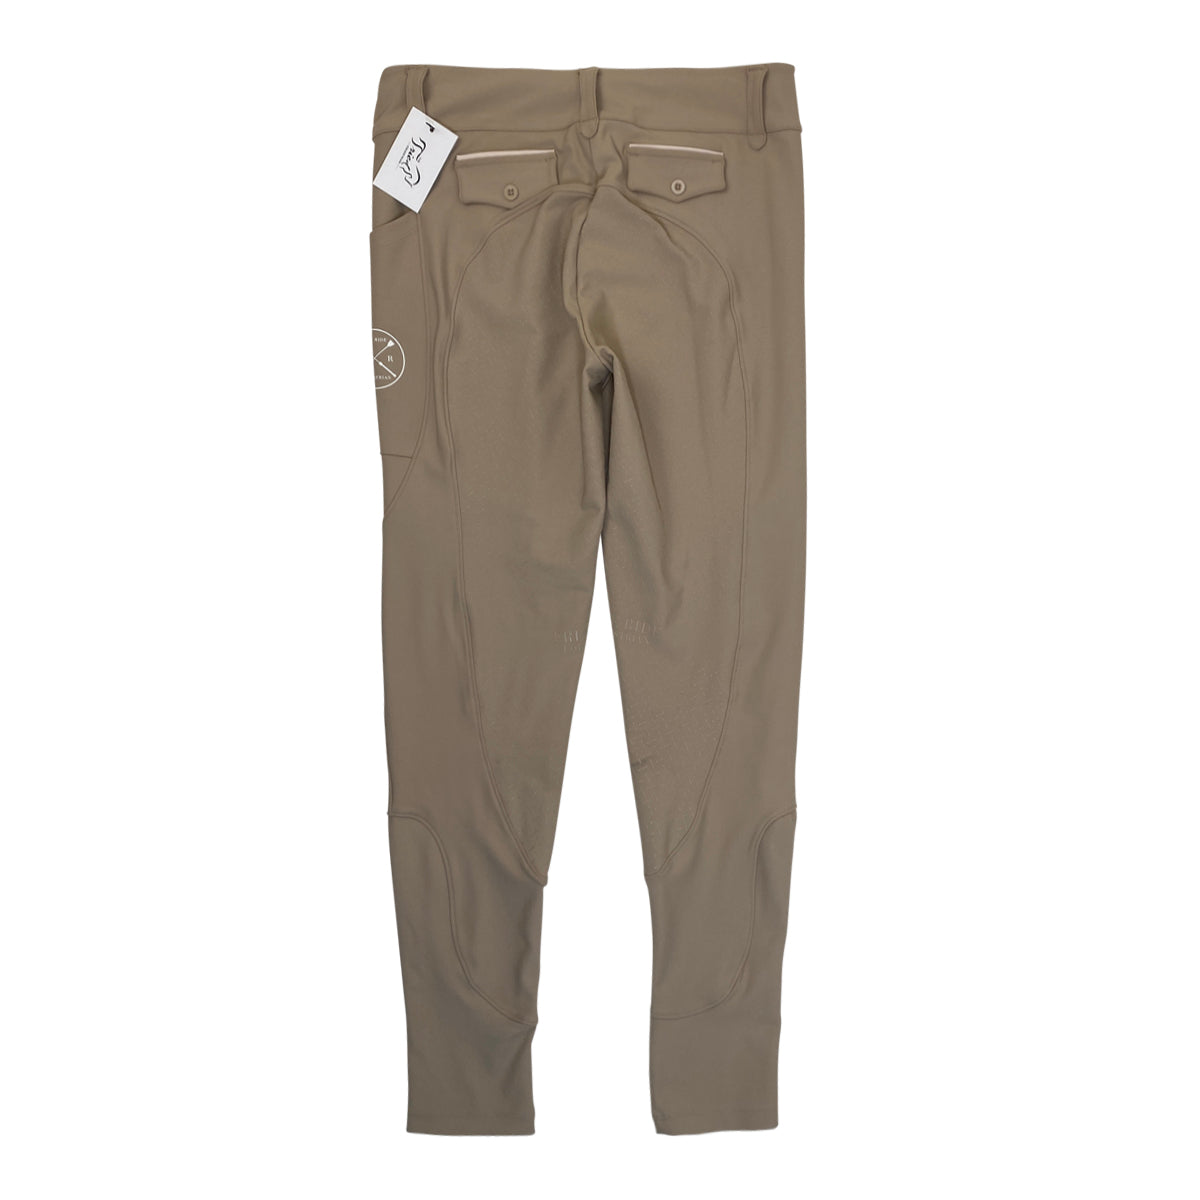 Free Ride Equestrian 'Lux Hybrid' Full Seat Breeches in Sand